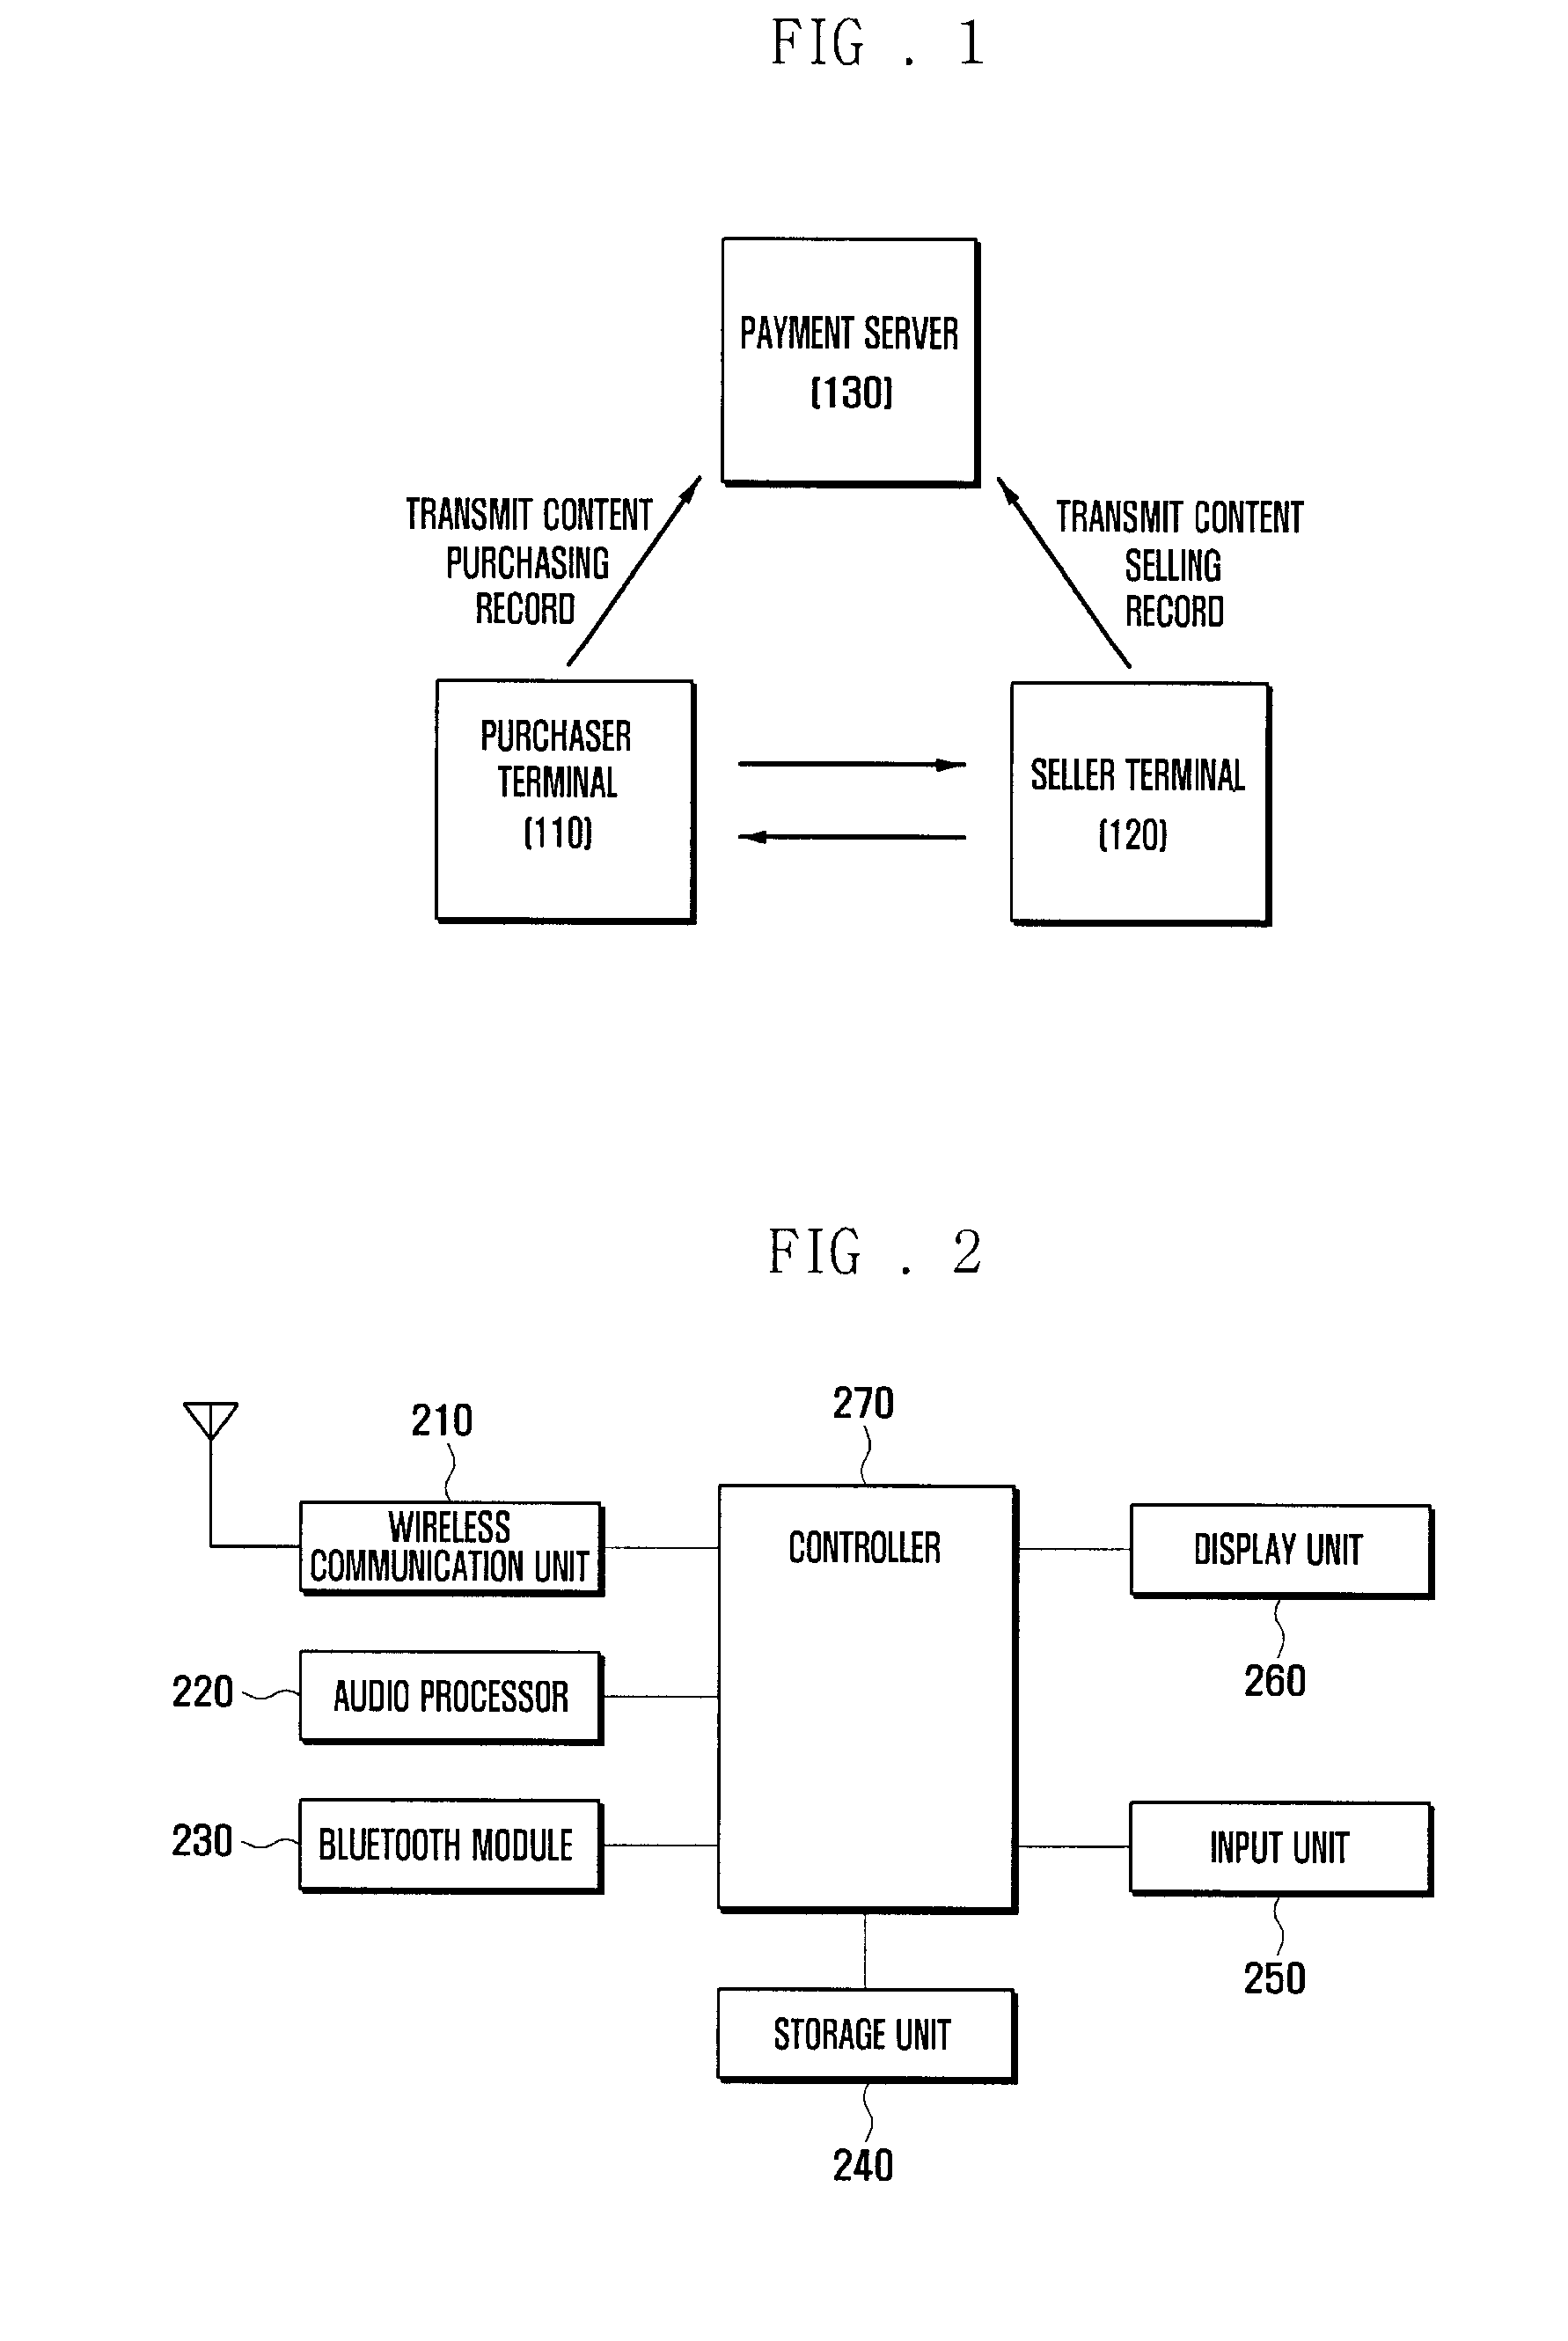 Content transaction method and system